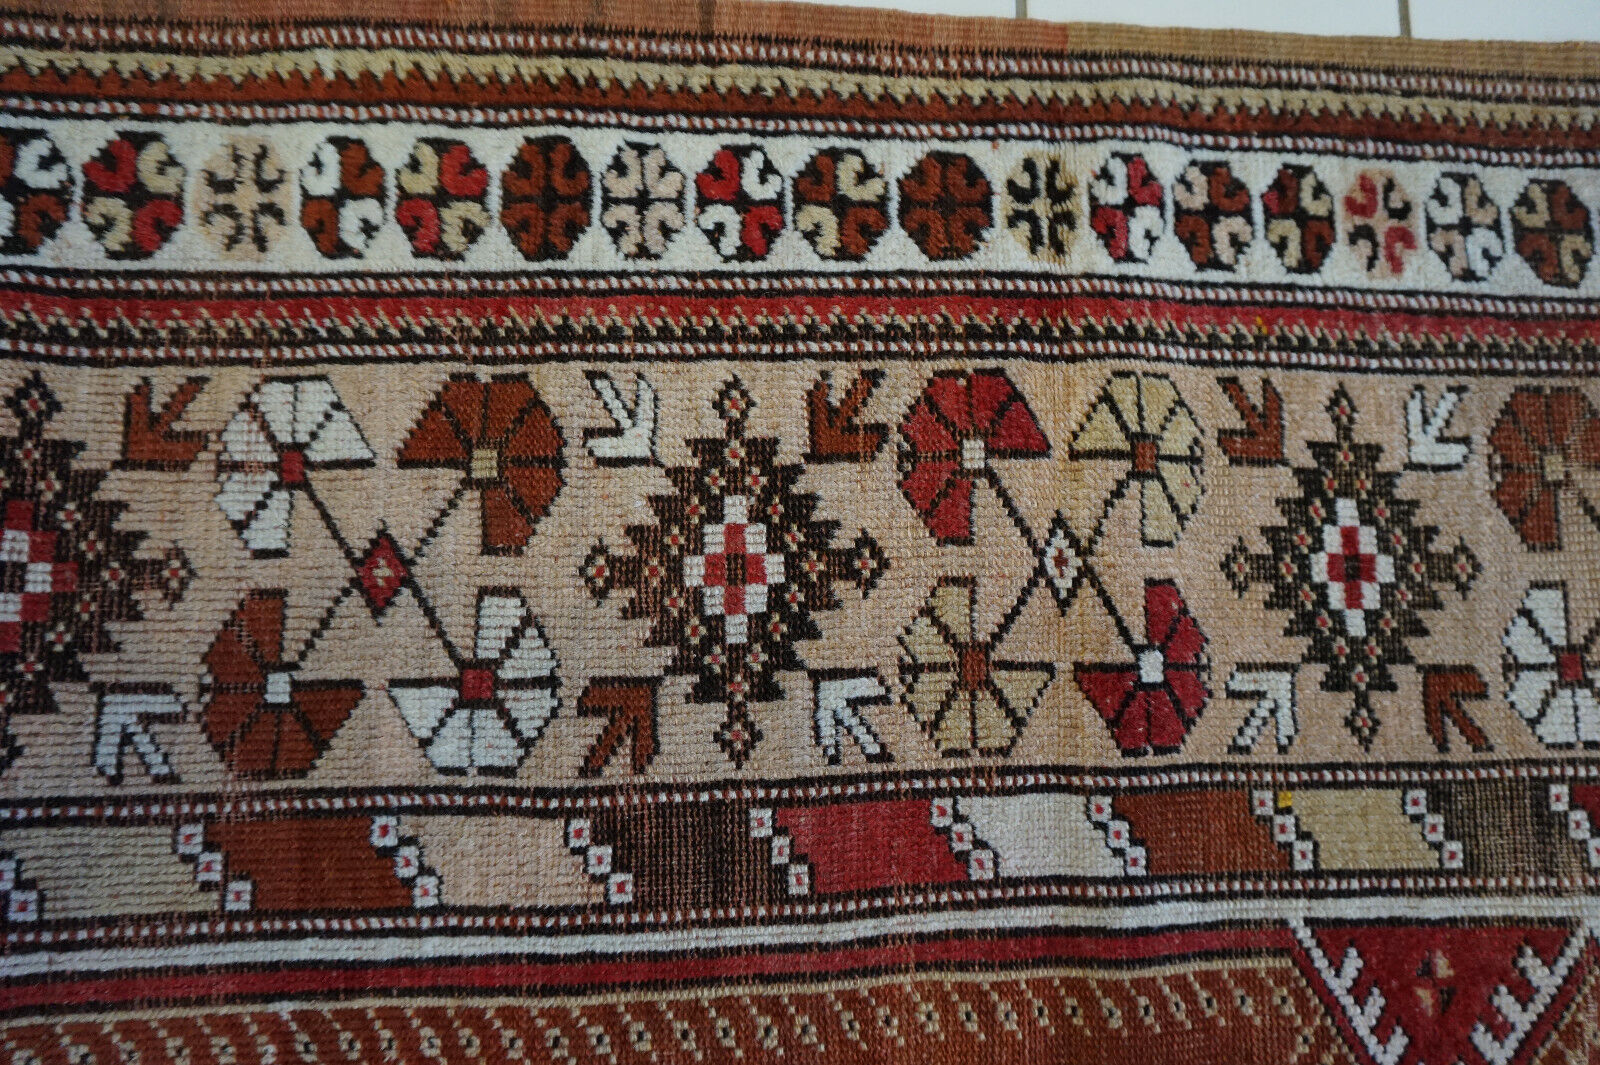 Side view of the Handmade Traditional Turkish Melas Rug demonstrating its durable wool material